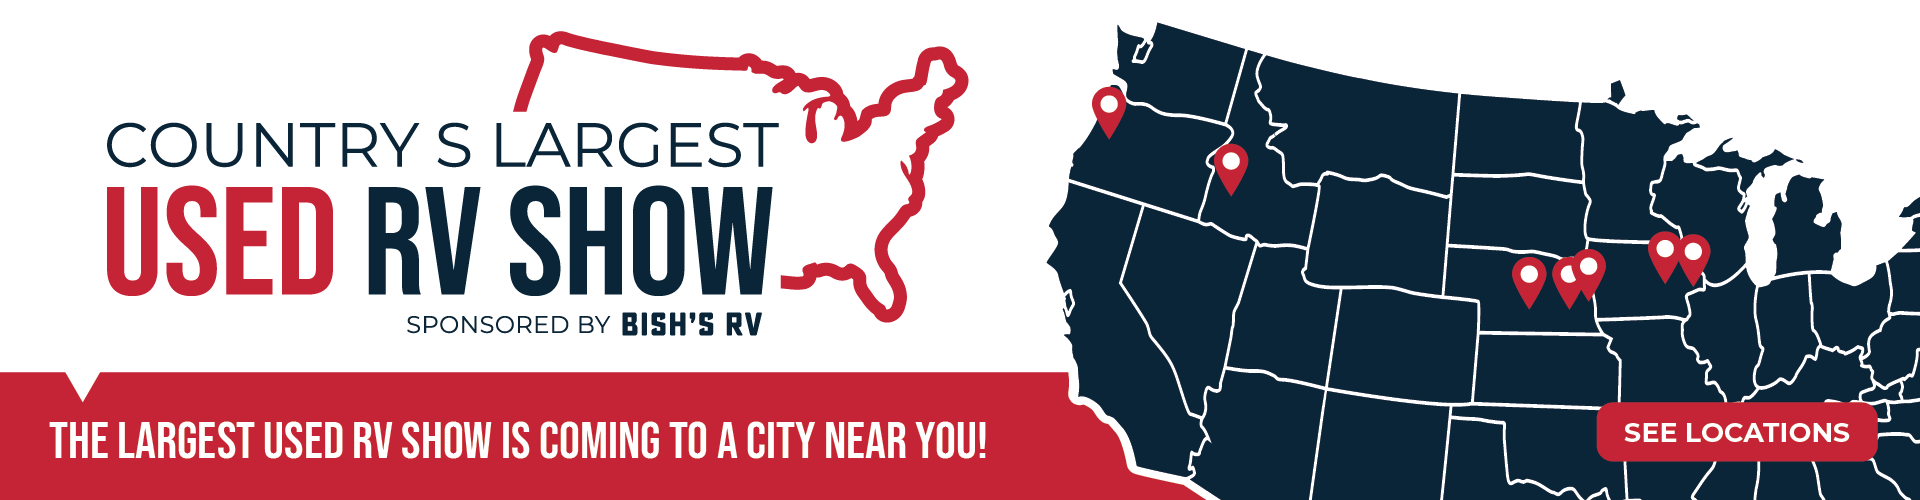 Country's Largest Used RV Show - Show Locations